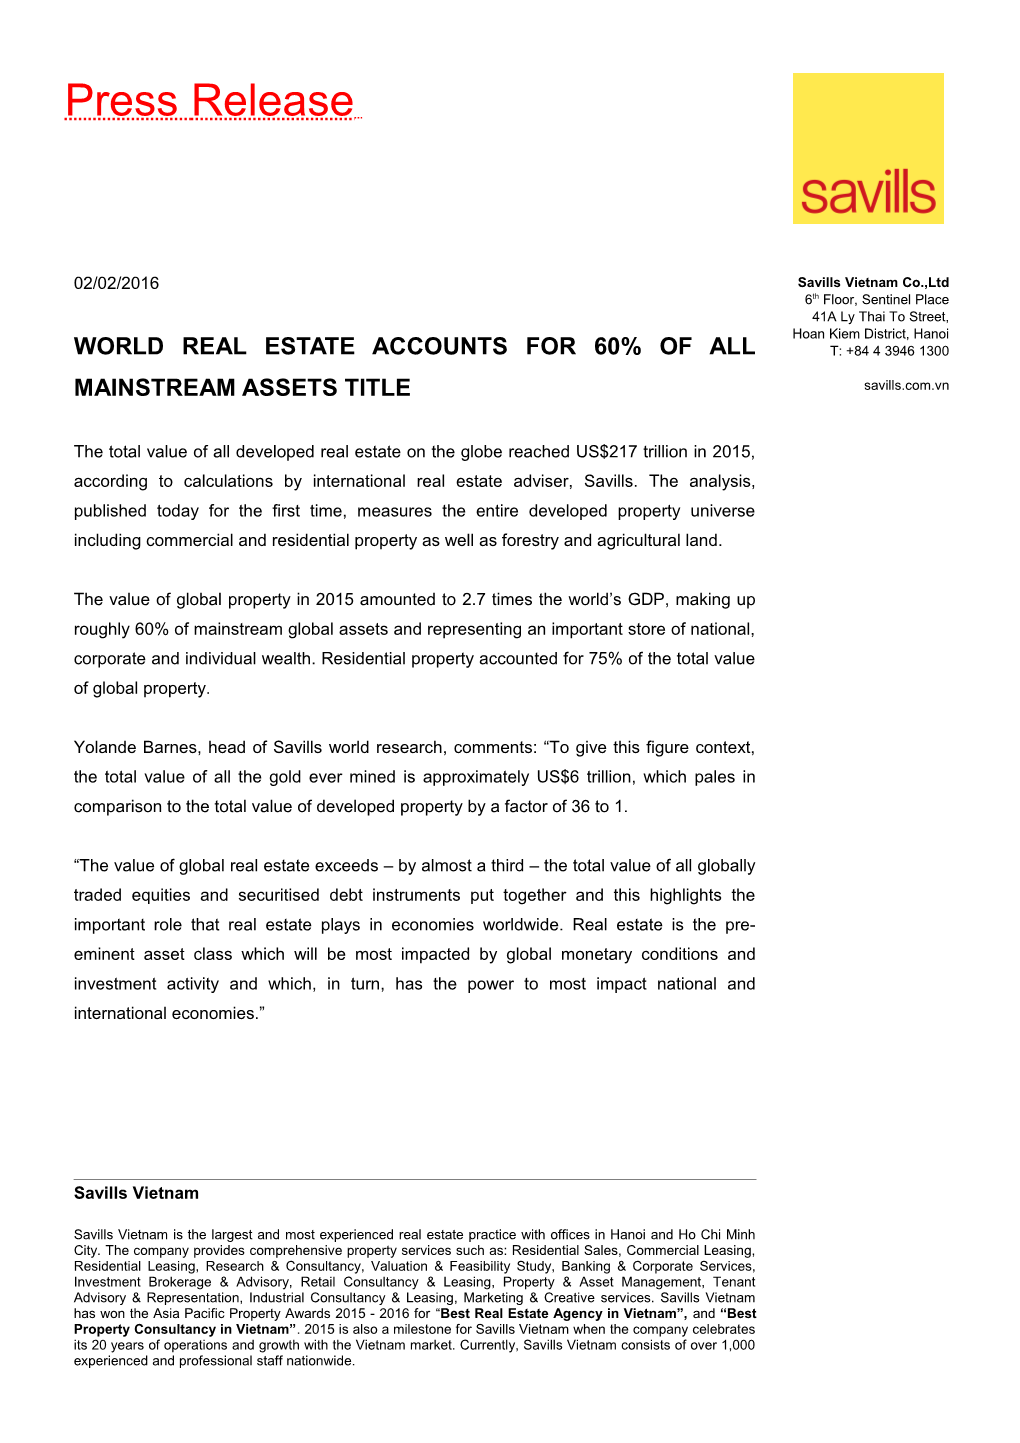 World Real Estate Accounts for 60% of All Mainstream Assets TITLE